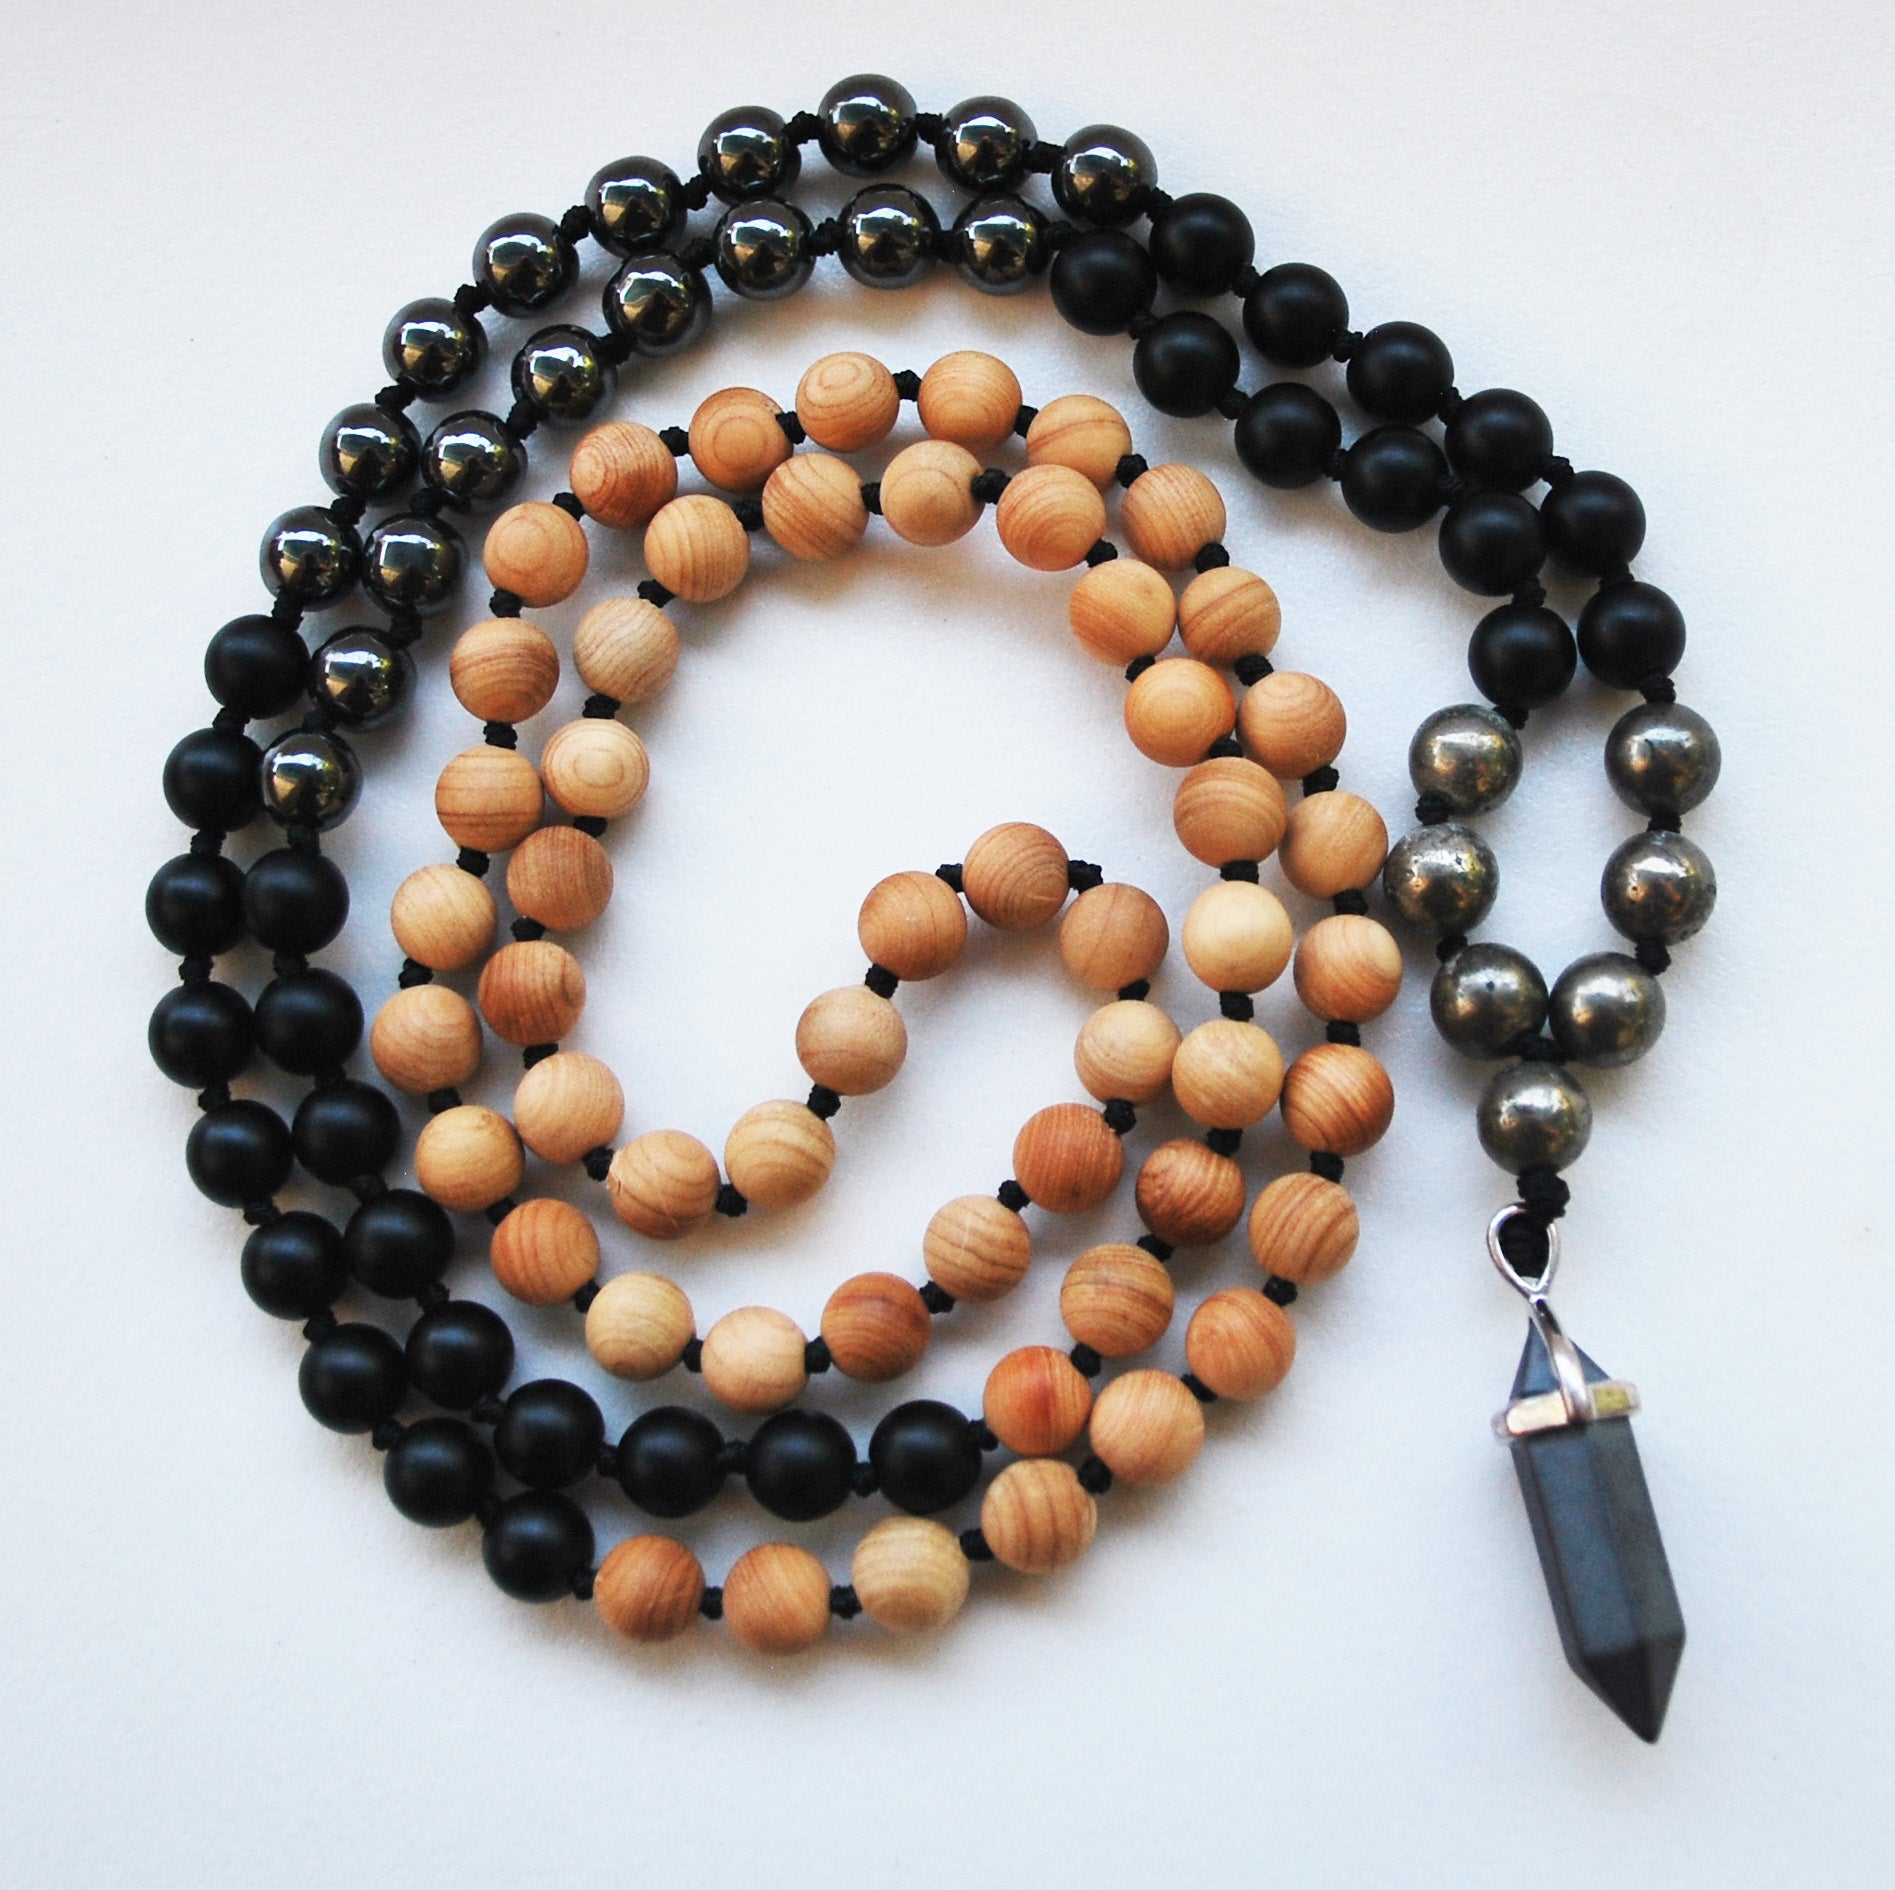 Cypress & Hematite 108 Knotted Mala Necklace with Cotton Tassel